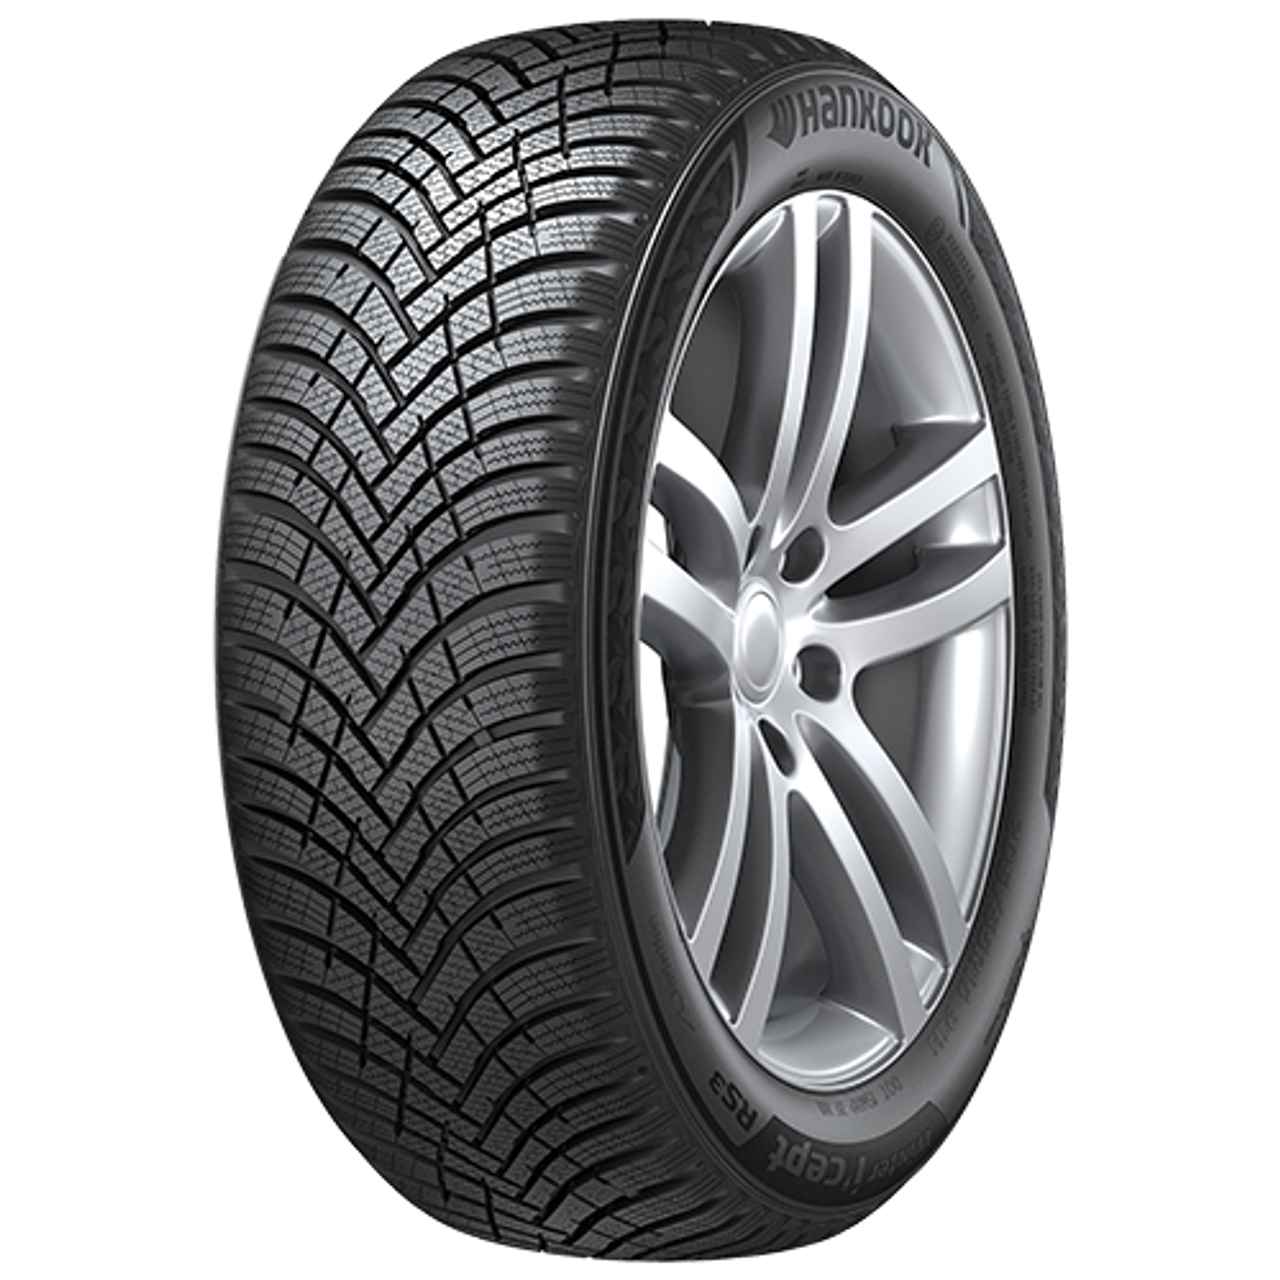 HANKOOK WINTER I*CEPT RS3 205/55R16 91H BSW